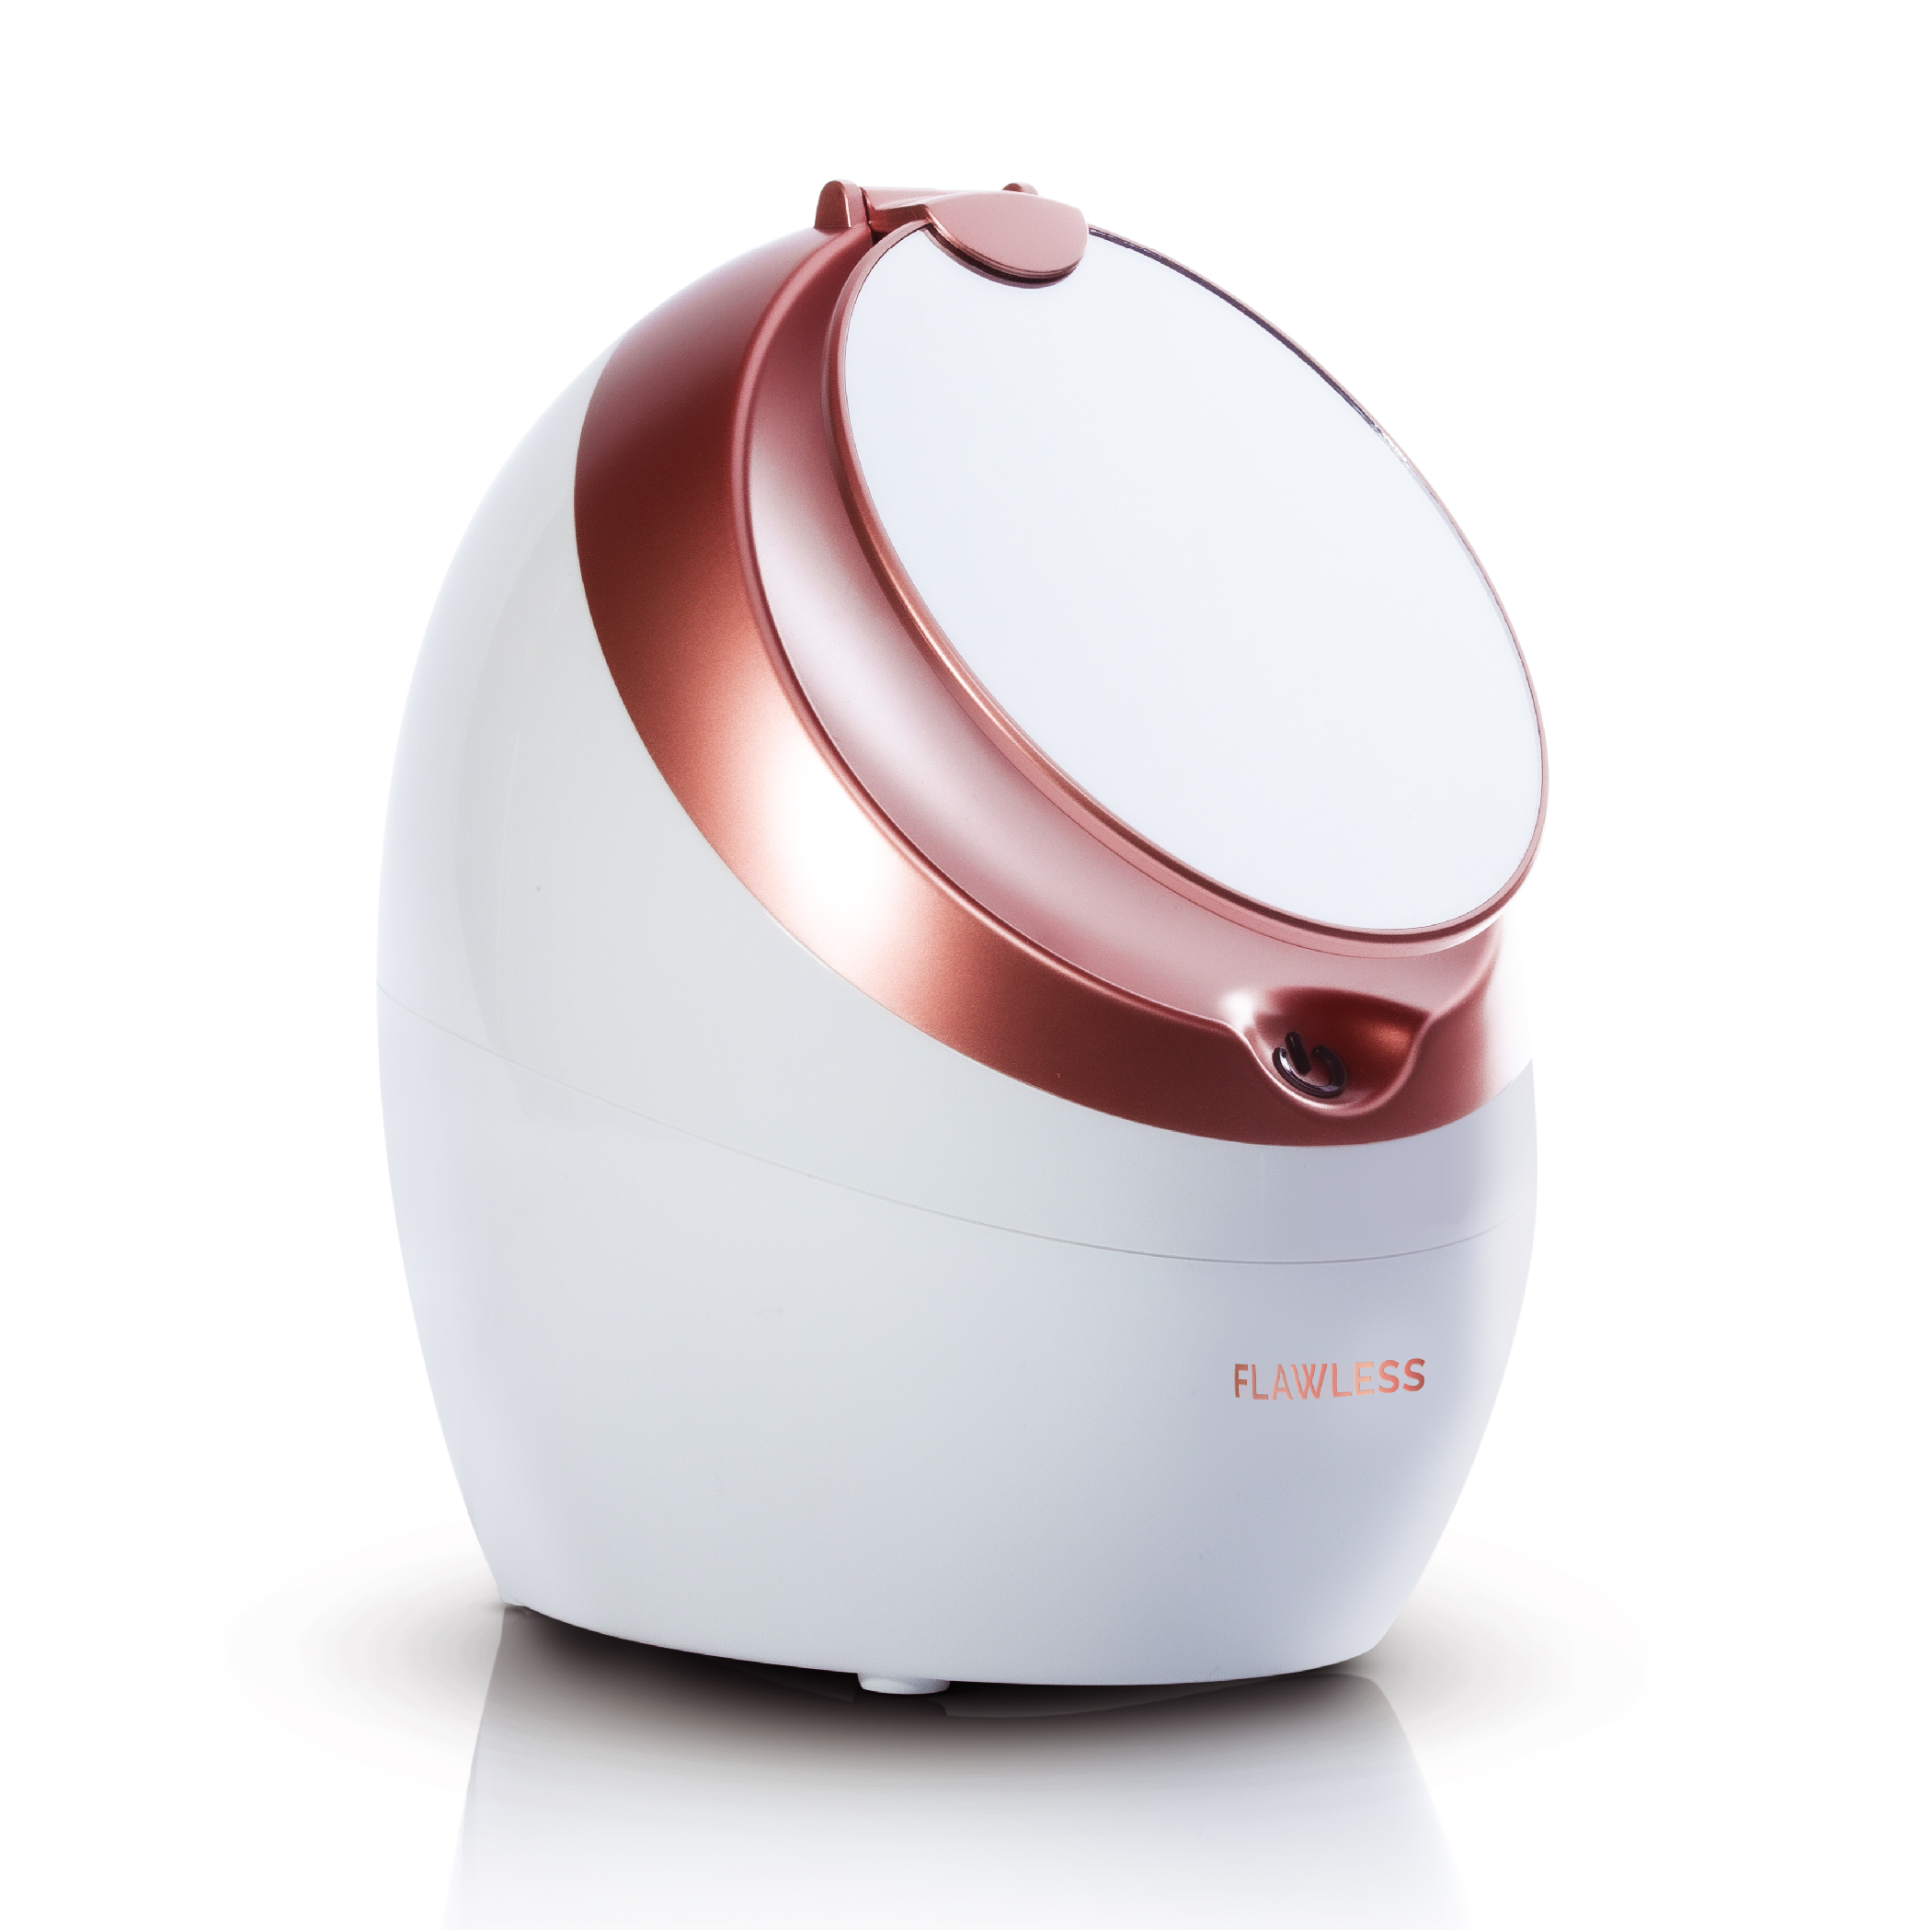 Finishing Touch Flawless Facial Steamer - image 1 of 12